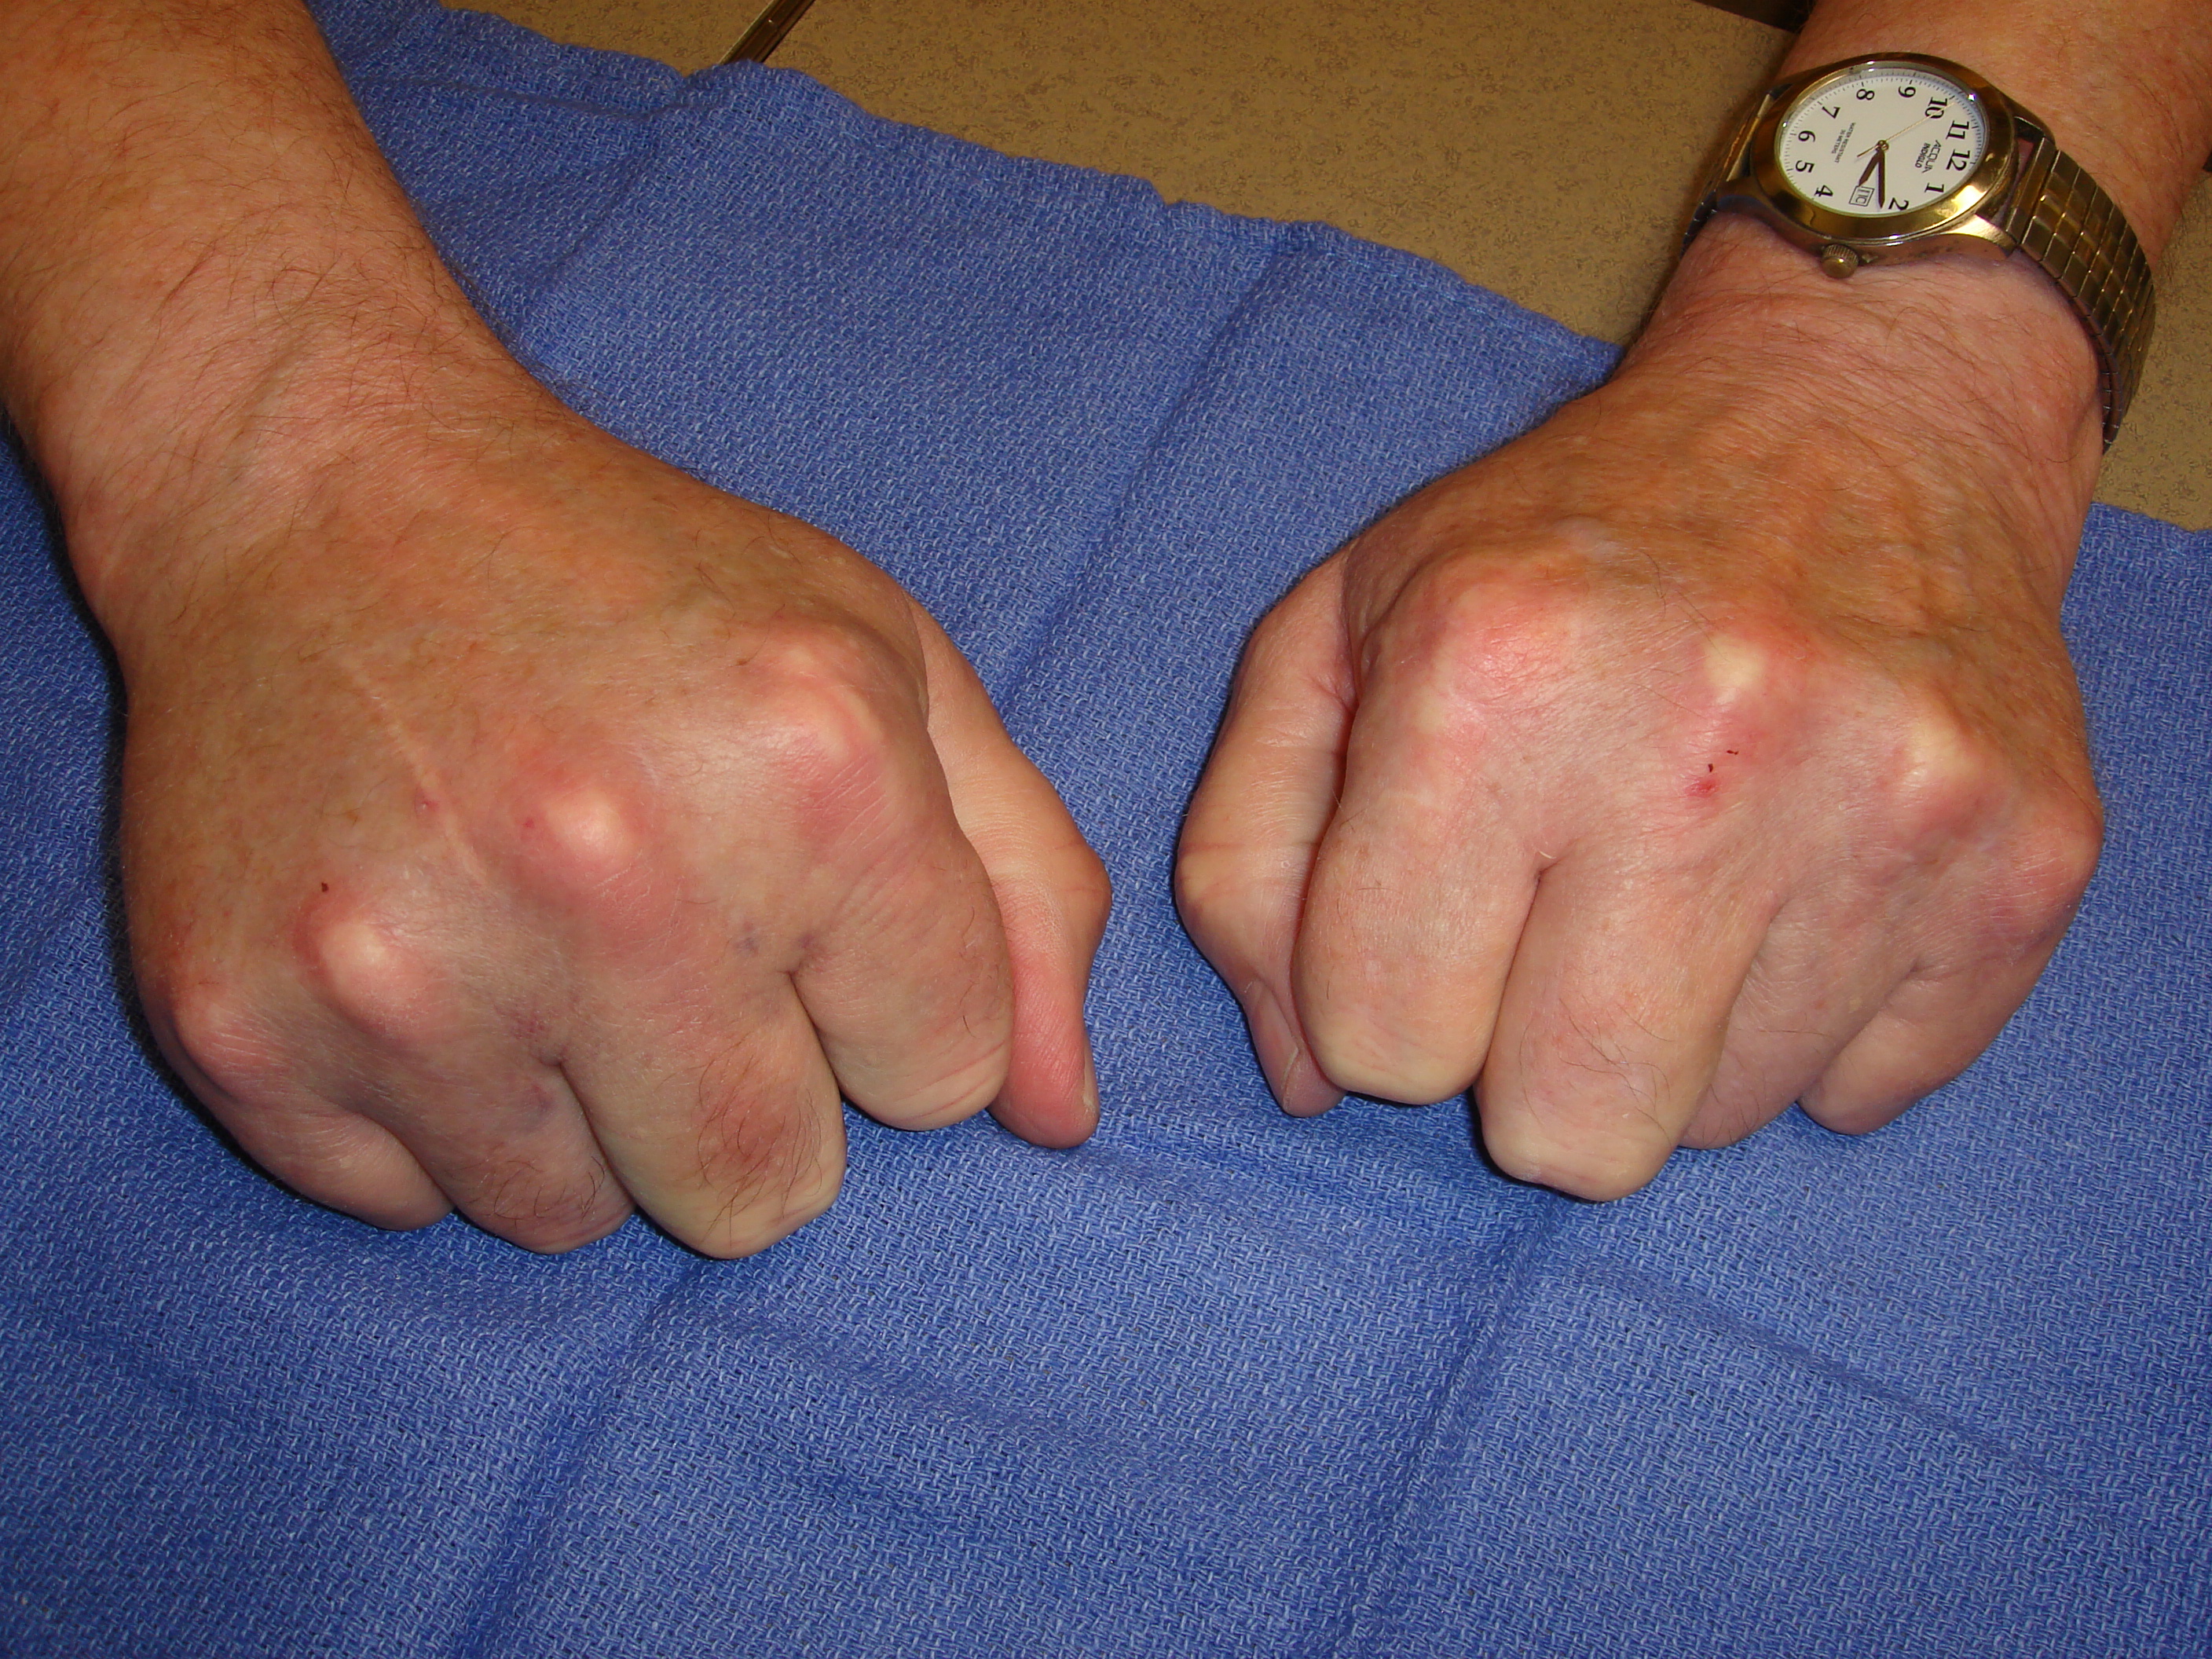 Figure 7b: At the 48-hour visit his right hand is minimally swollen; however, he also has mildly uncomfortable axillary bruising with enlarged nodes.